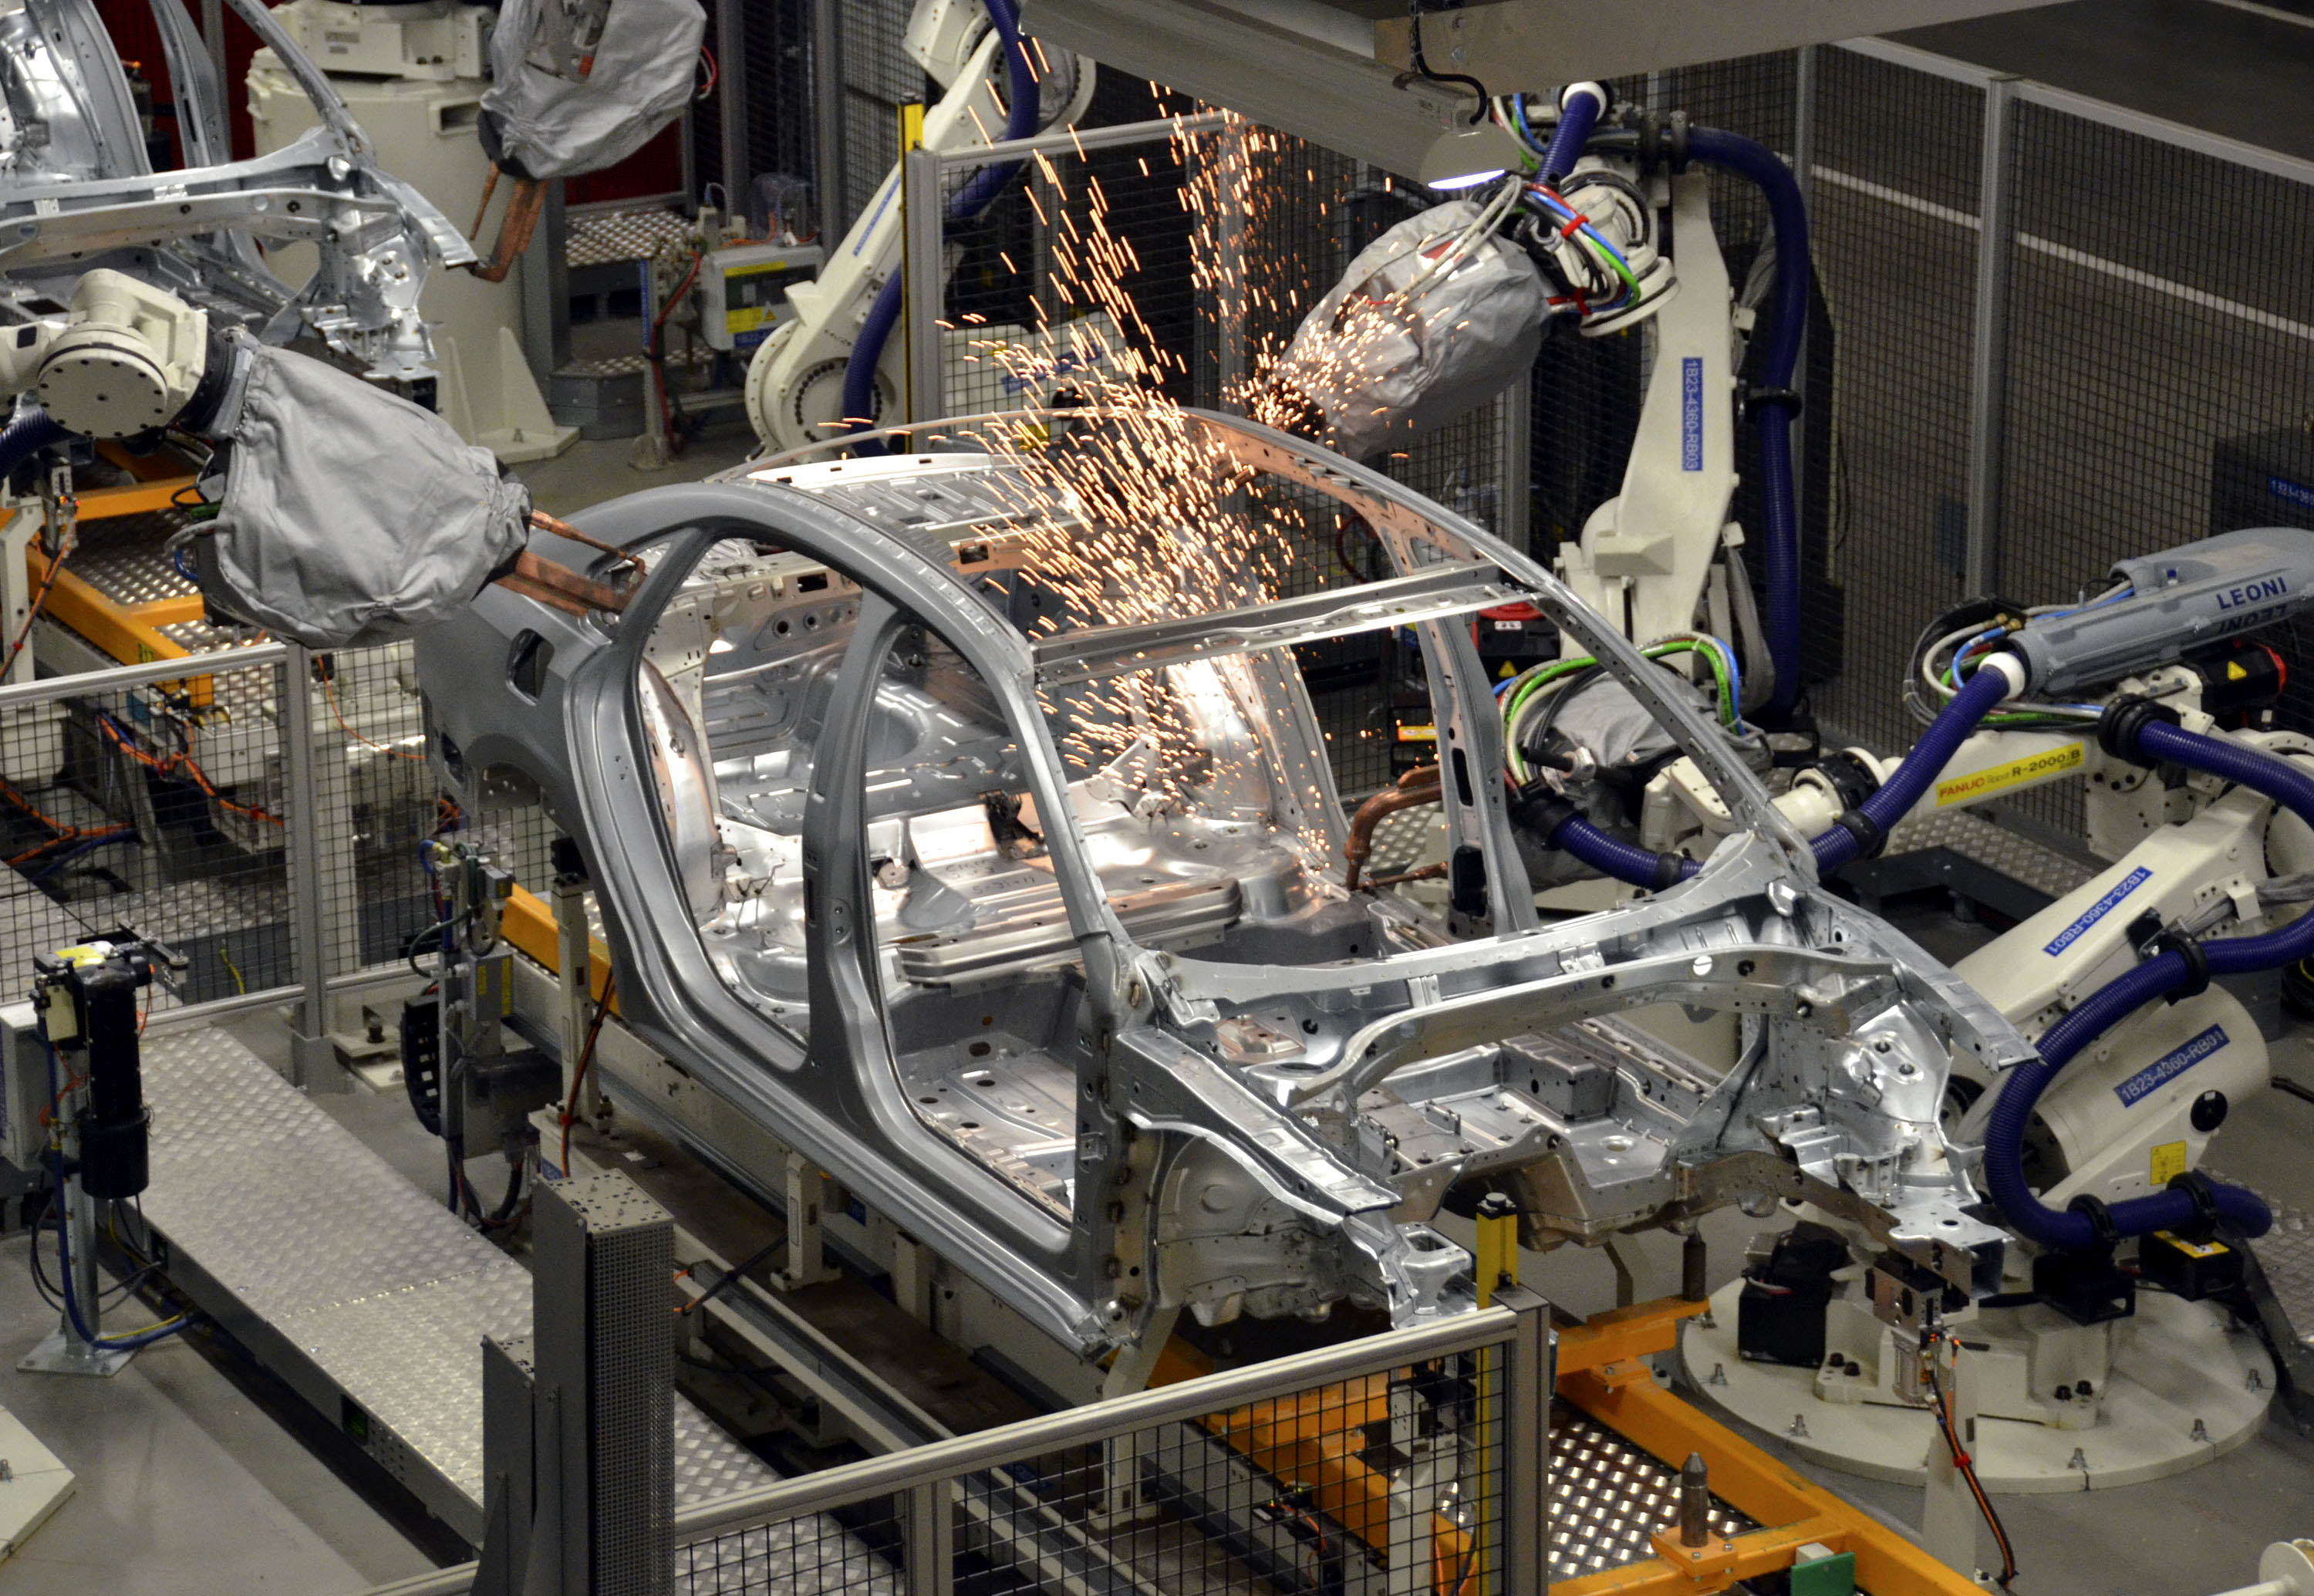 Robots at the Volkswagen Chattanooga plant weld a 2012 VW Passat in the body shop at the plant near Chattanooga, Tennessee, U.S., on Wednesday, June 1, 2011. The plant which has an initial capacity of 125,000 units per year, will build the 2012 Volkswagen Passat for the U.S., Mexico and Canada. Photographer: Mark Elias/Bloomberg (Mark Elias / Bloomberg via Getty Images)